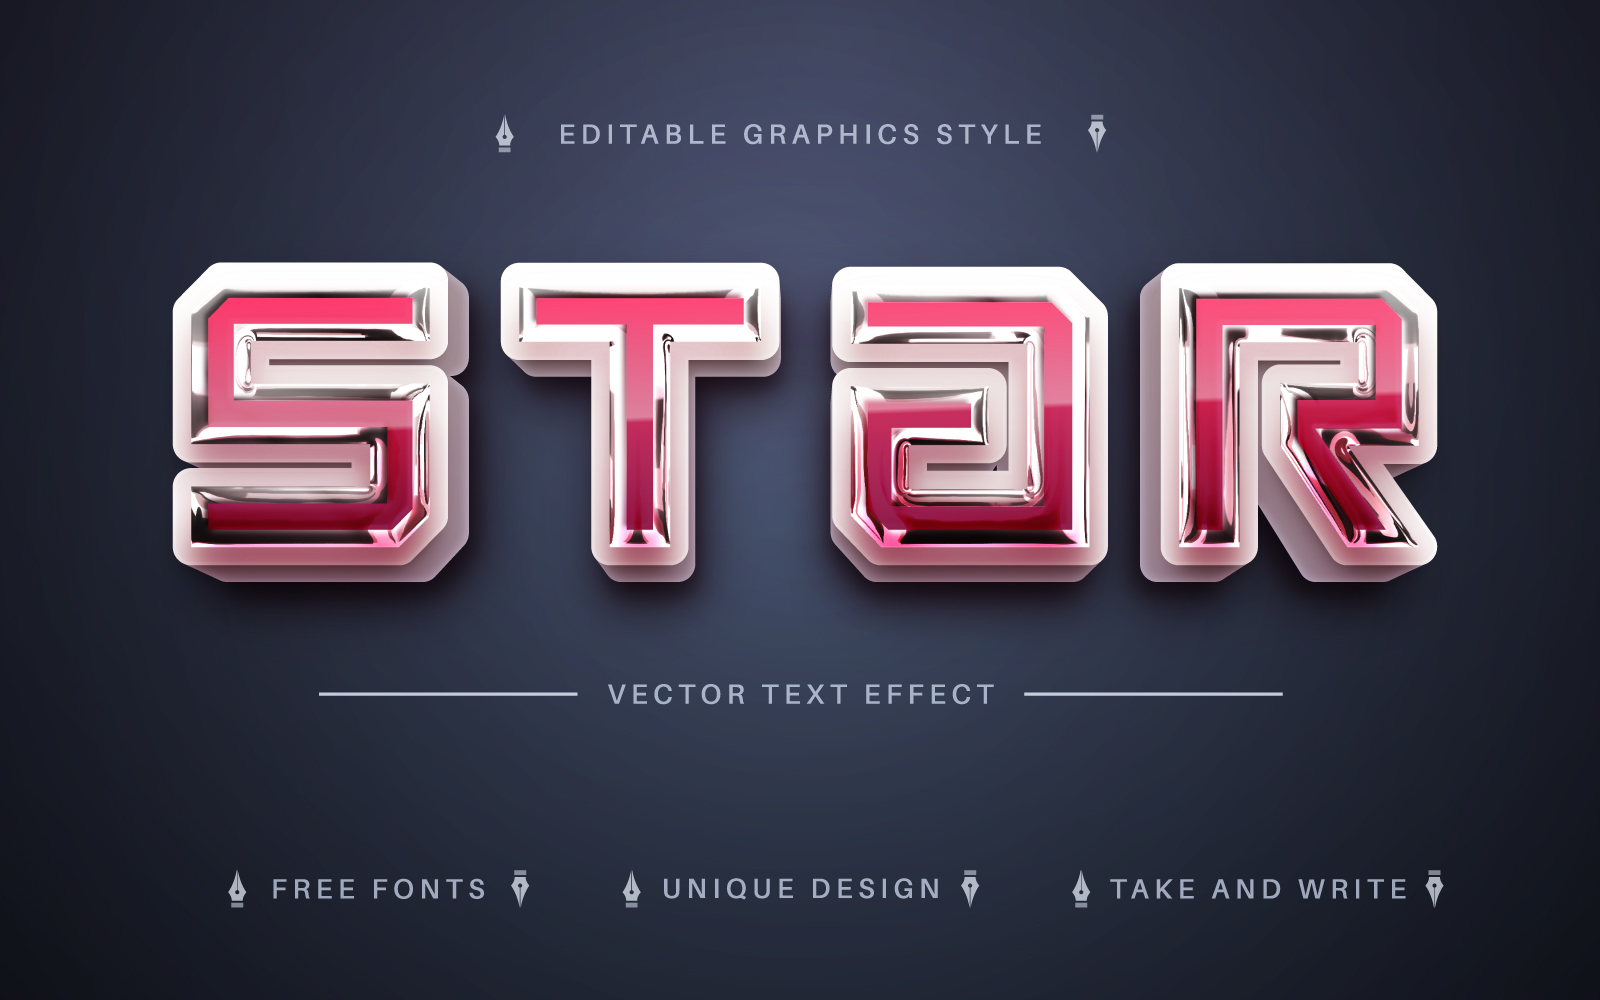 Realistic 3D - Editable Text Effect, Font Style, Graphics Illustration